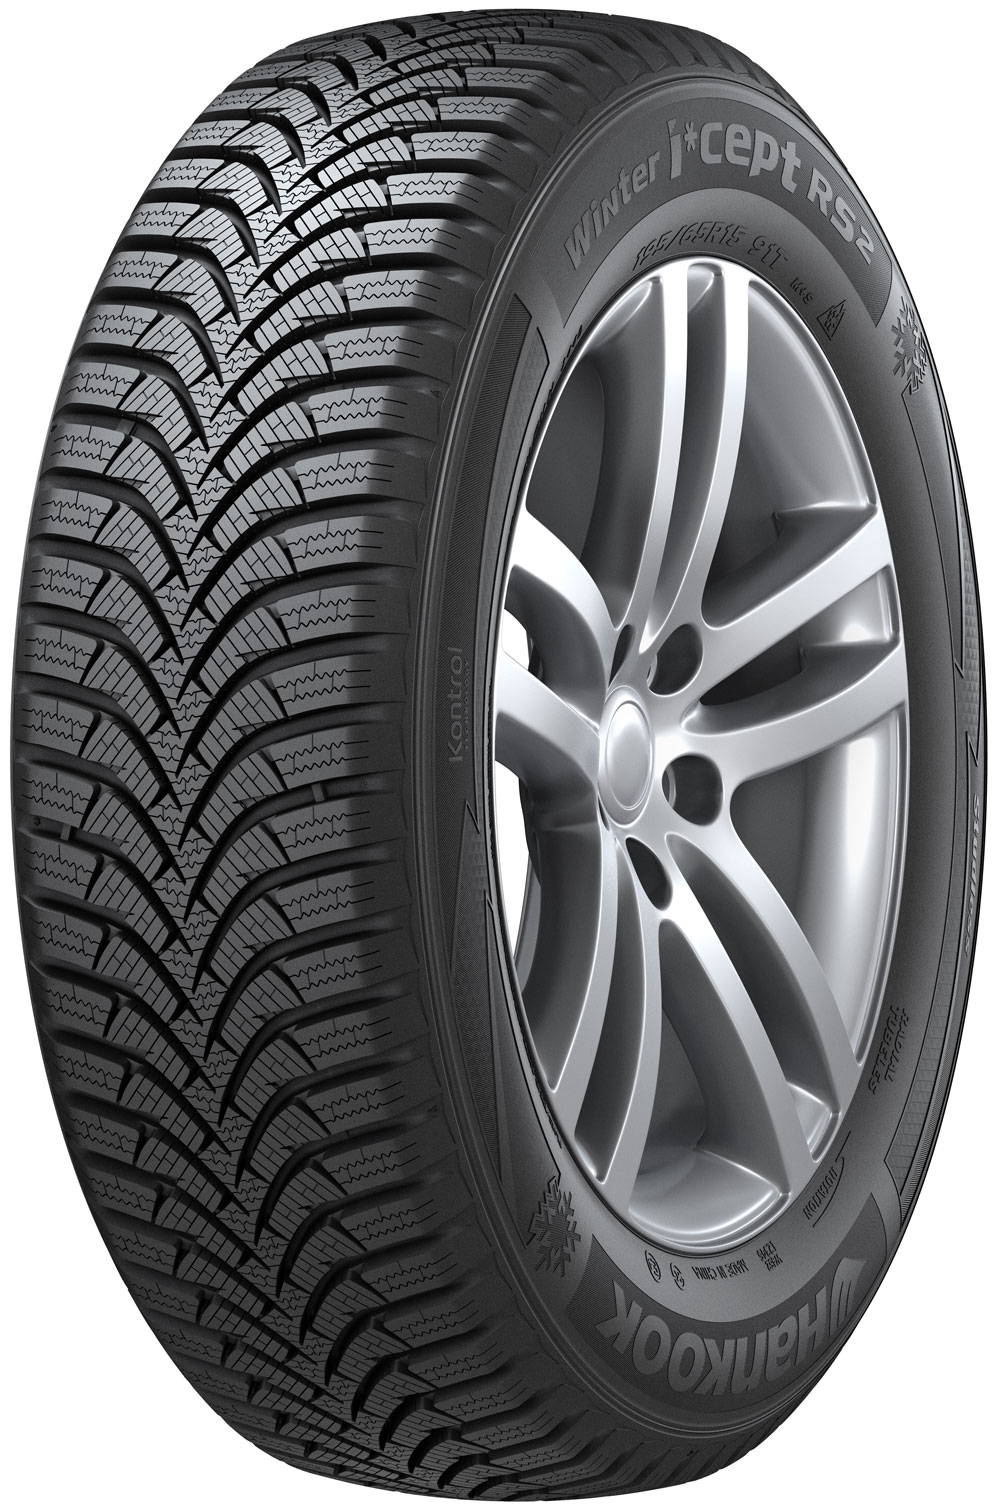 Anvelope auto HANKOOK Winter icept RS2 W452 XL 165/60 R14 79T